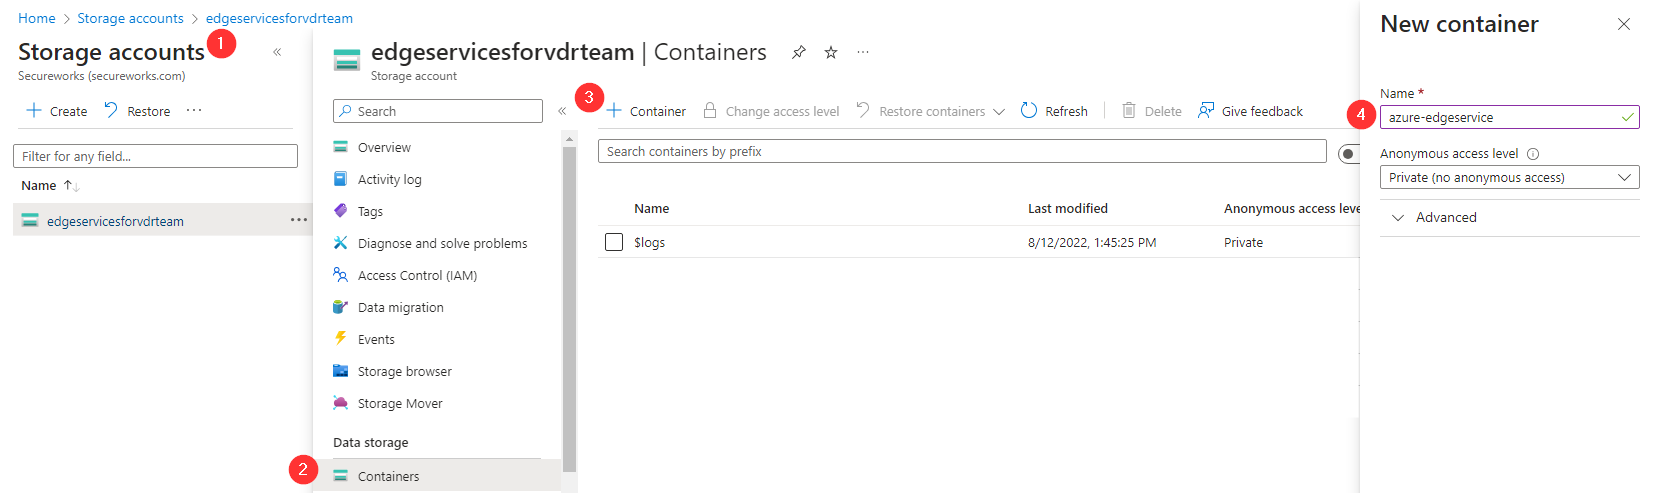 Create New Container